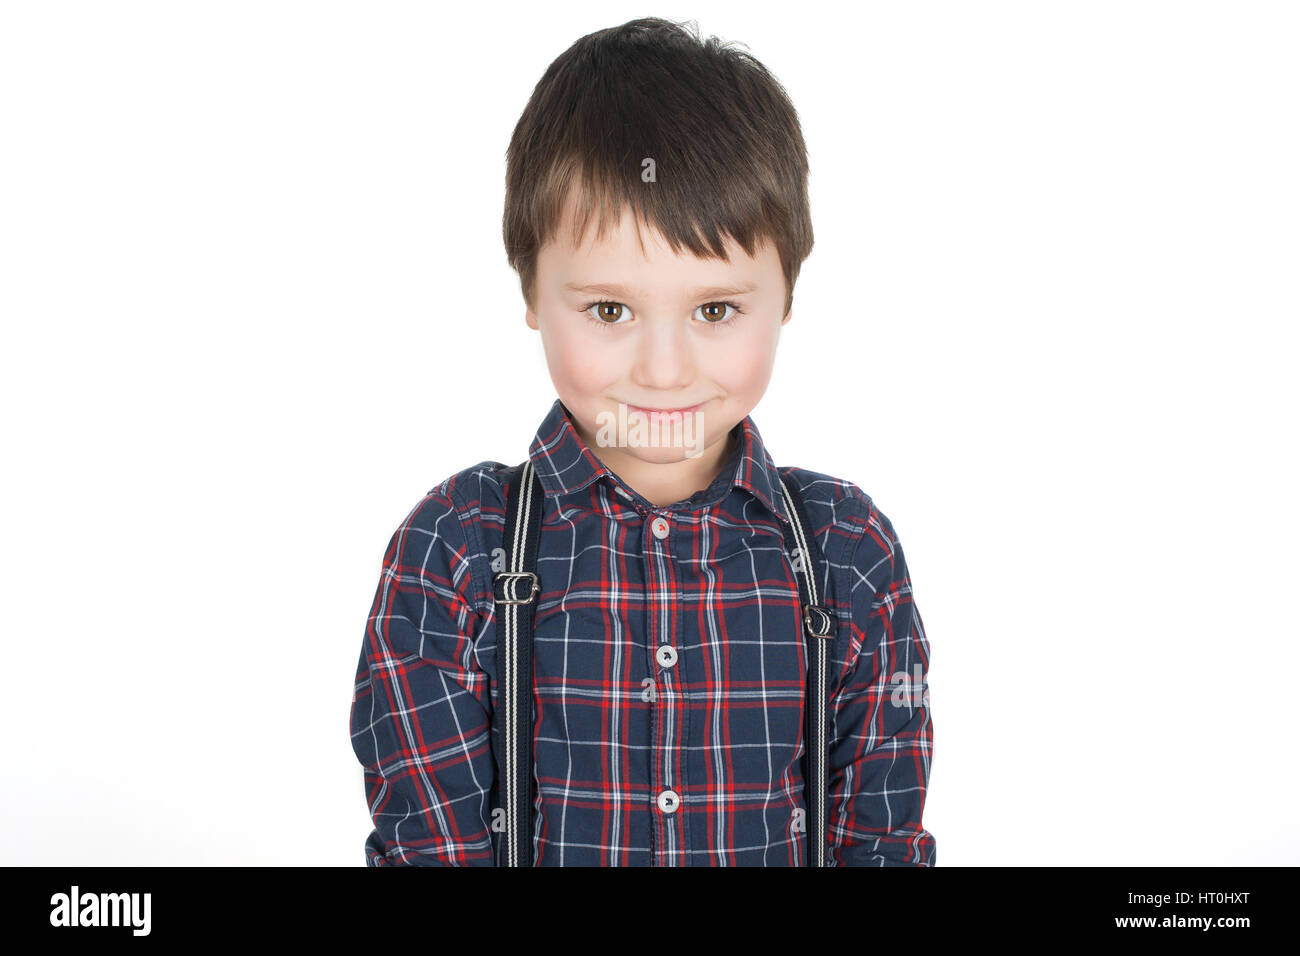 Happy cheeky little boy smiling. Isolated on a white background. Stock Photo